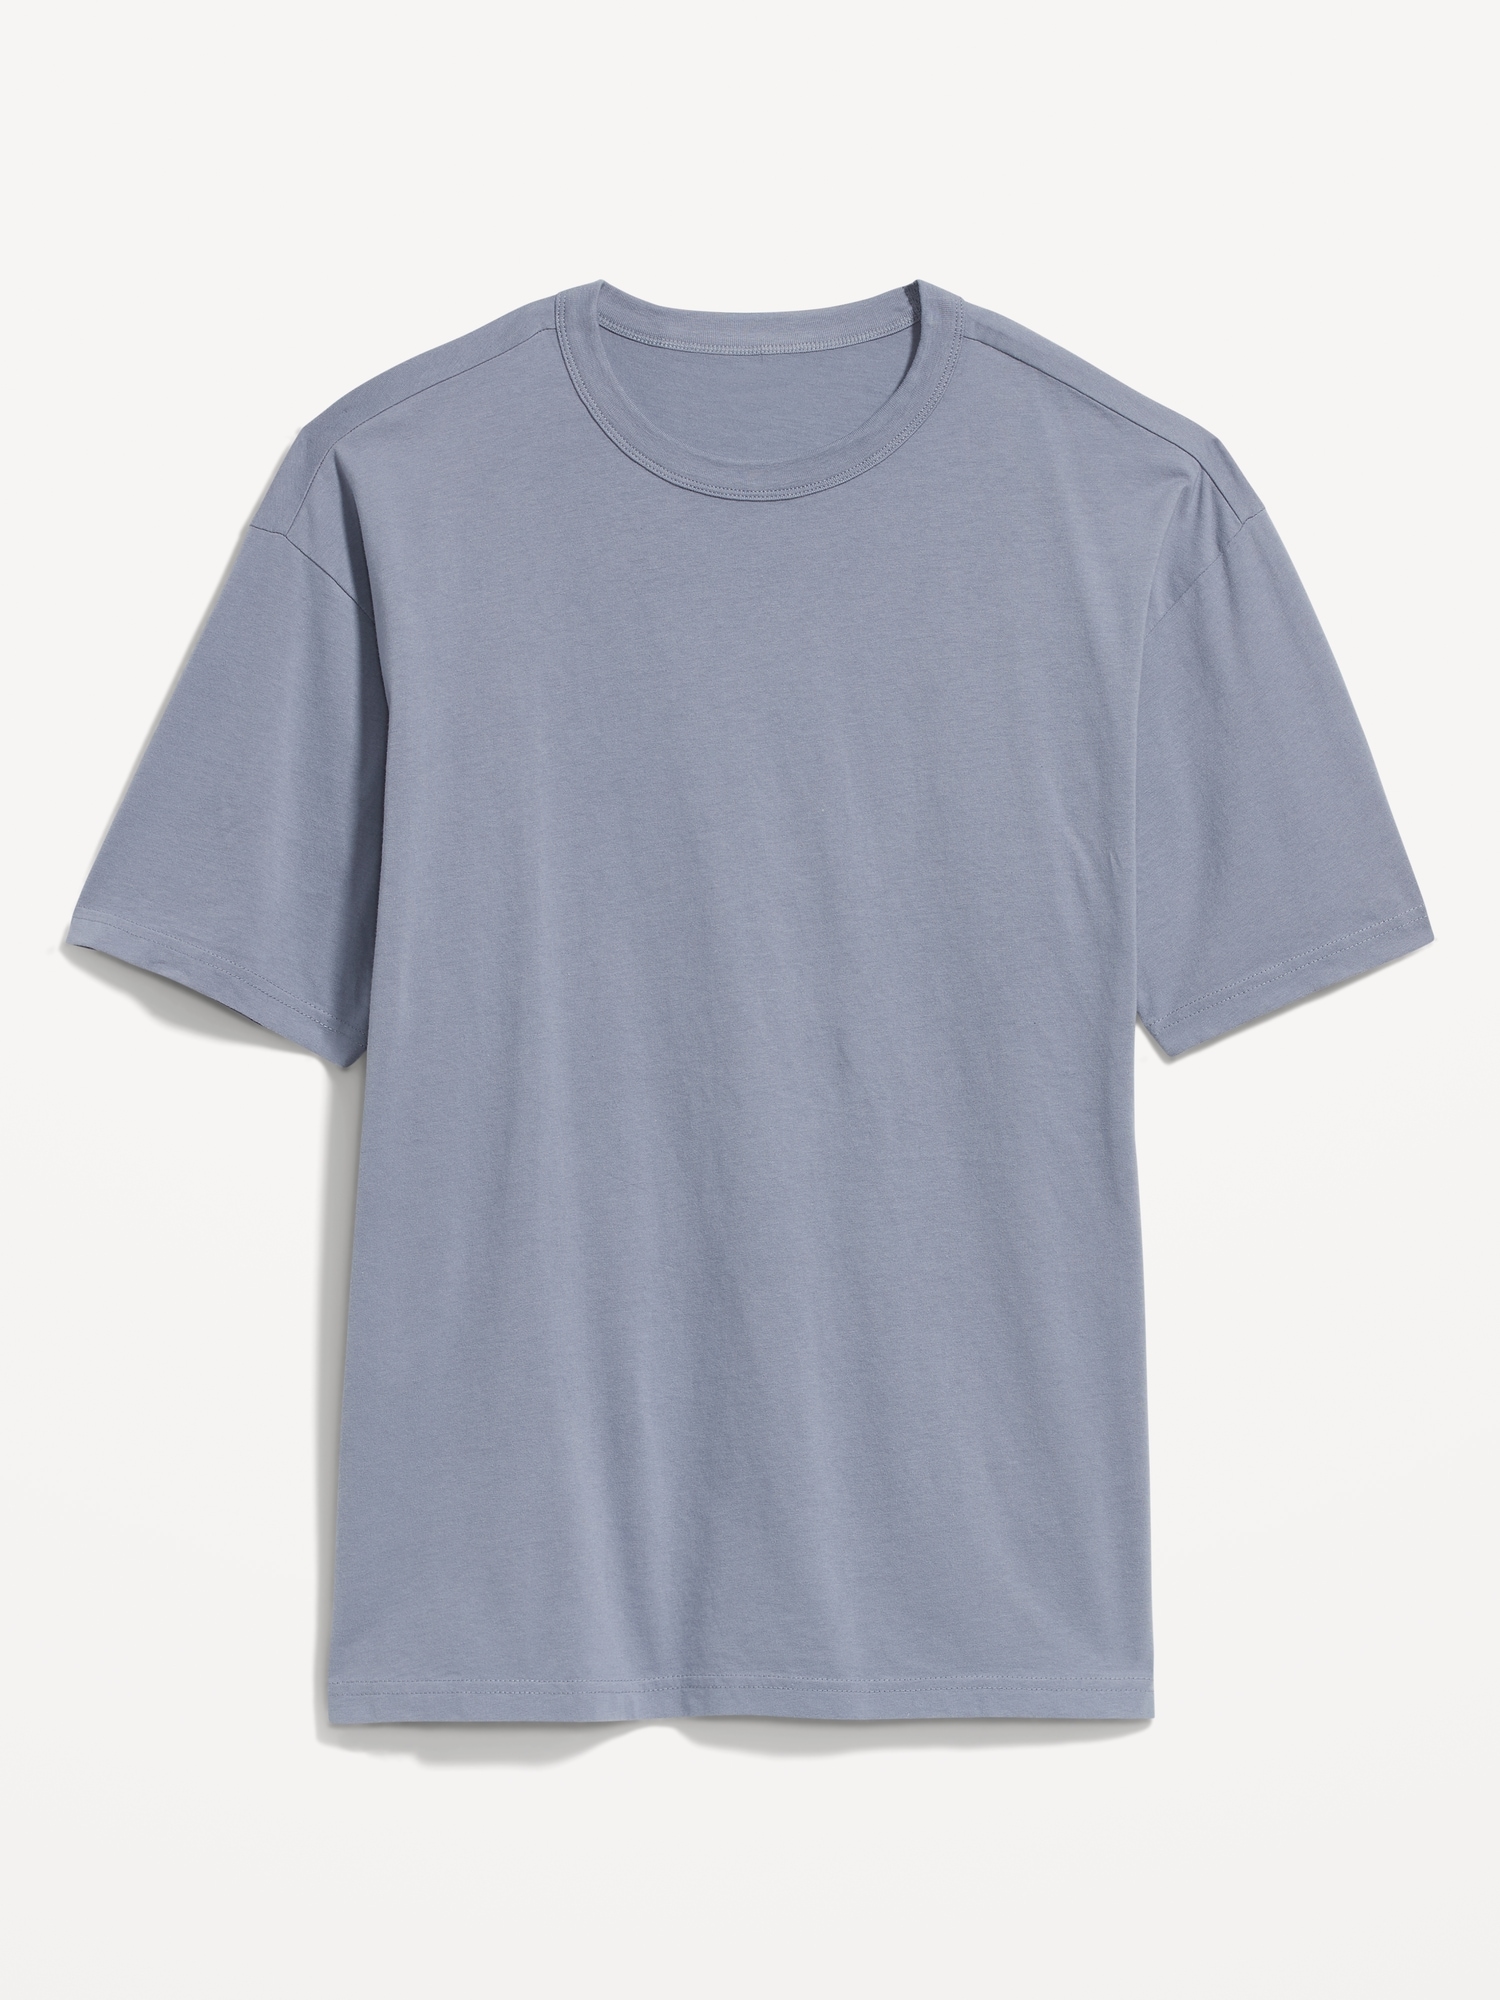 Loose Fit Crew-Neck T-Shirt | Old Navy